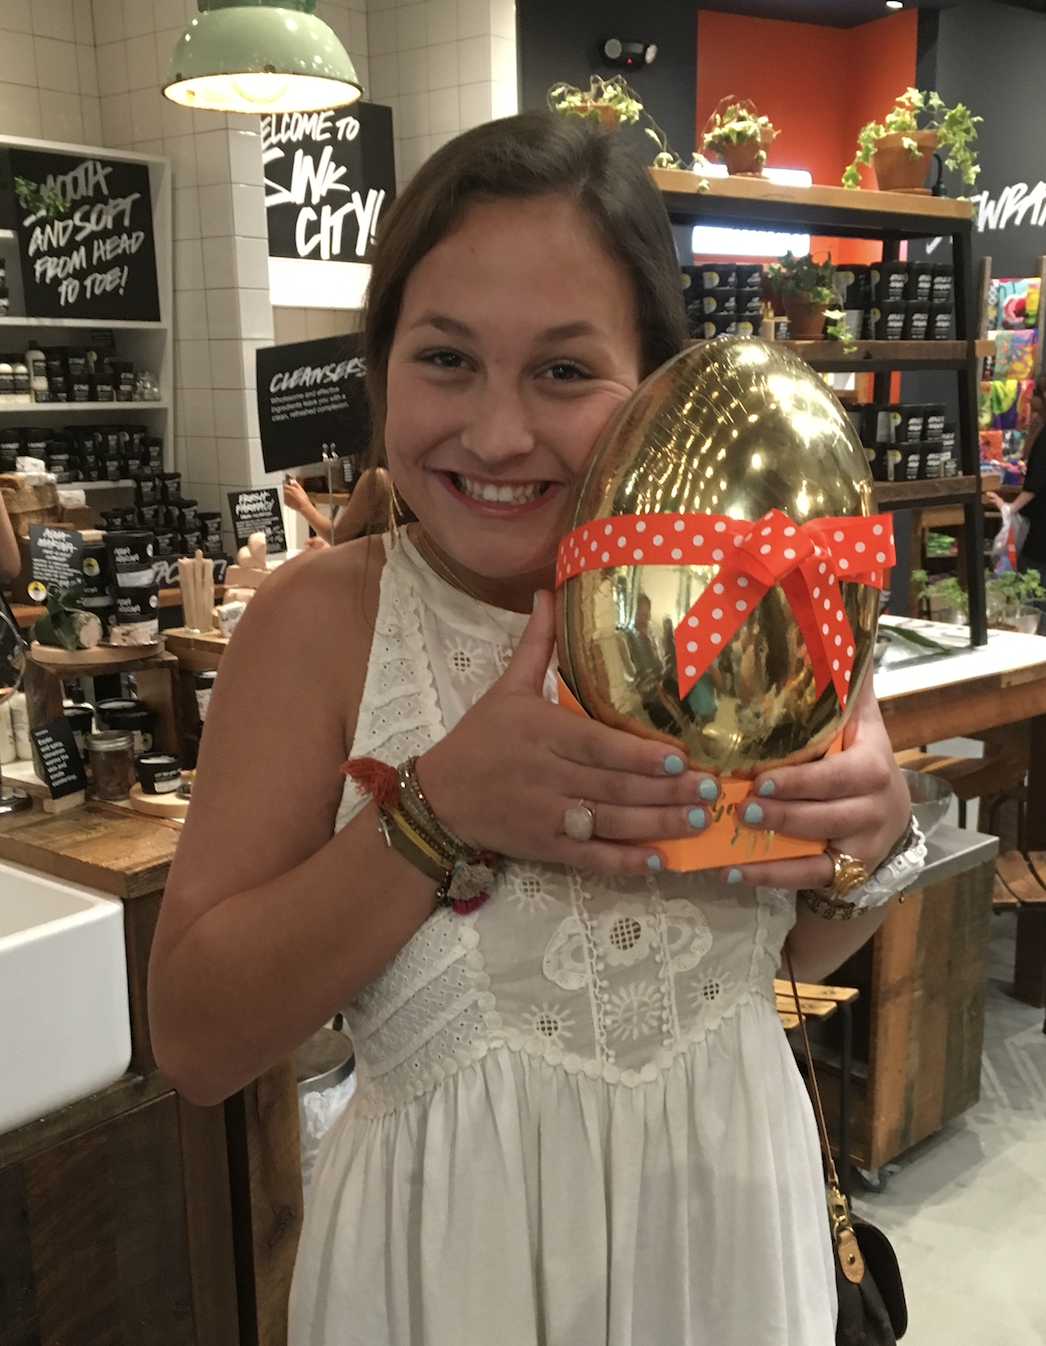 Niece with her $60 Egg of Bath Products